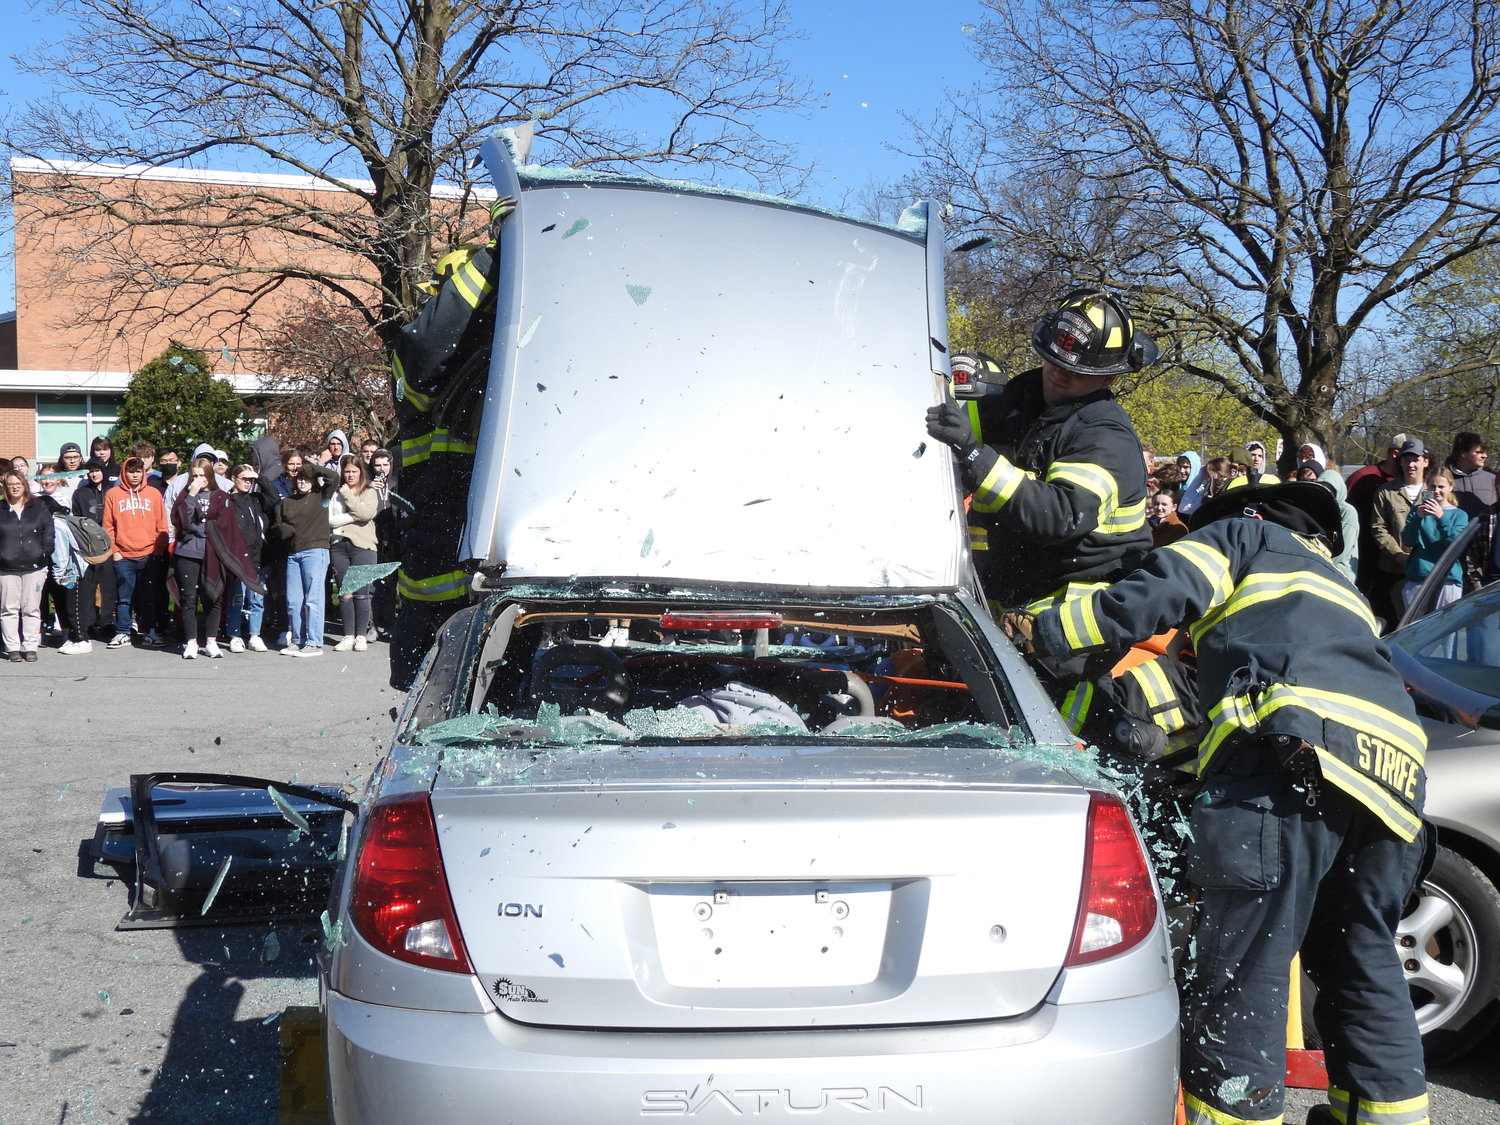 The Oneida Fire Department tears open a car after cutting it apart with hydraulic tools to safely remove DWI victims as part of the Oneida High School's Mock DWI